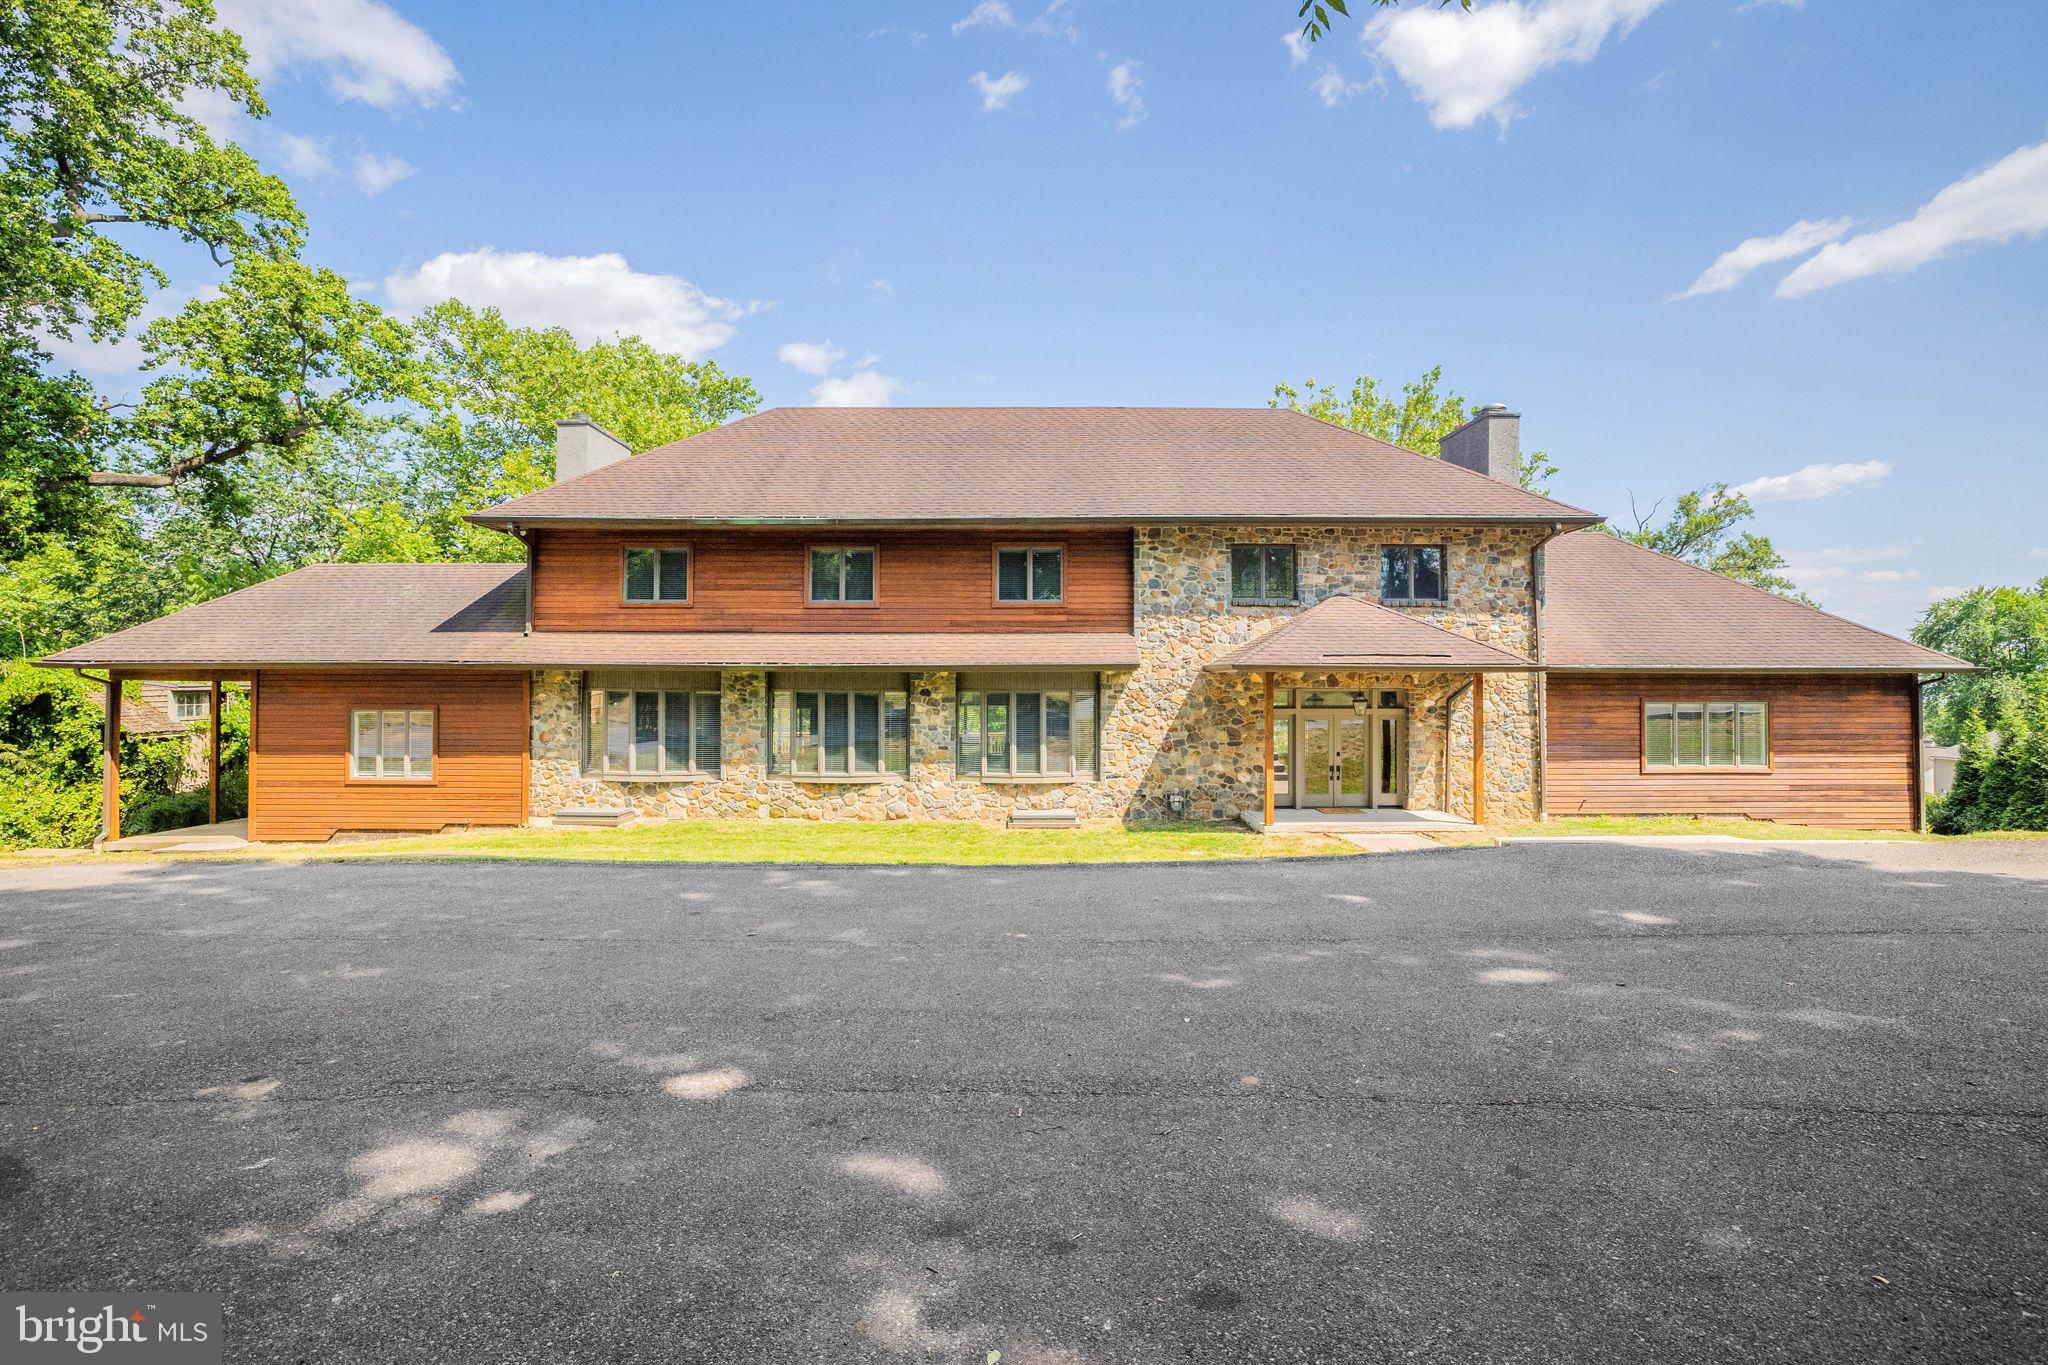 Welcome to 1500 Ridge Road! Quality describes this meticulously maintained 5 bedroom, 5 full / 1 hal